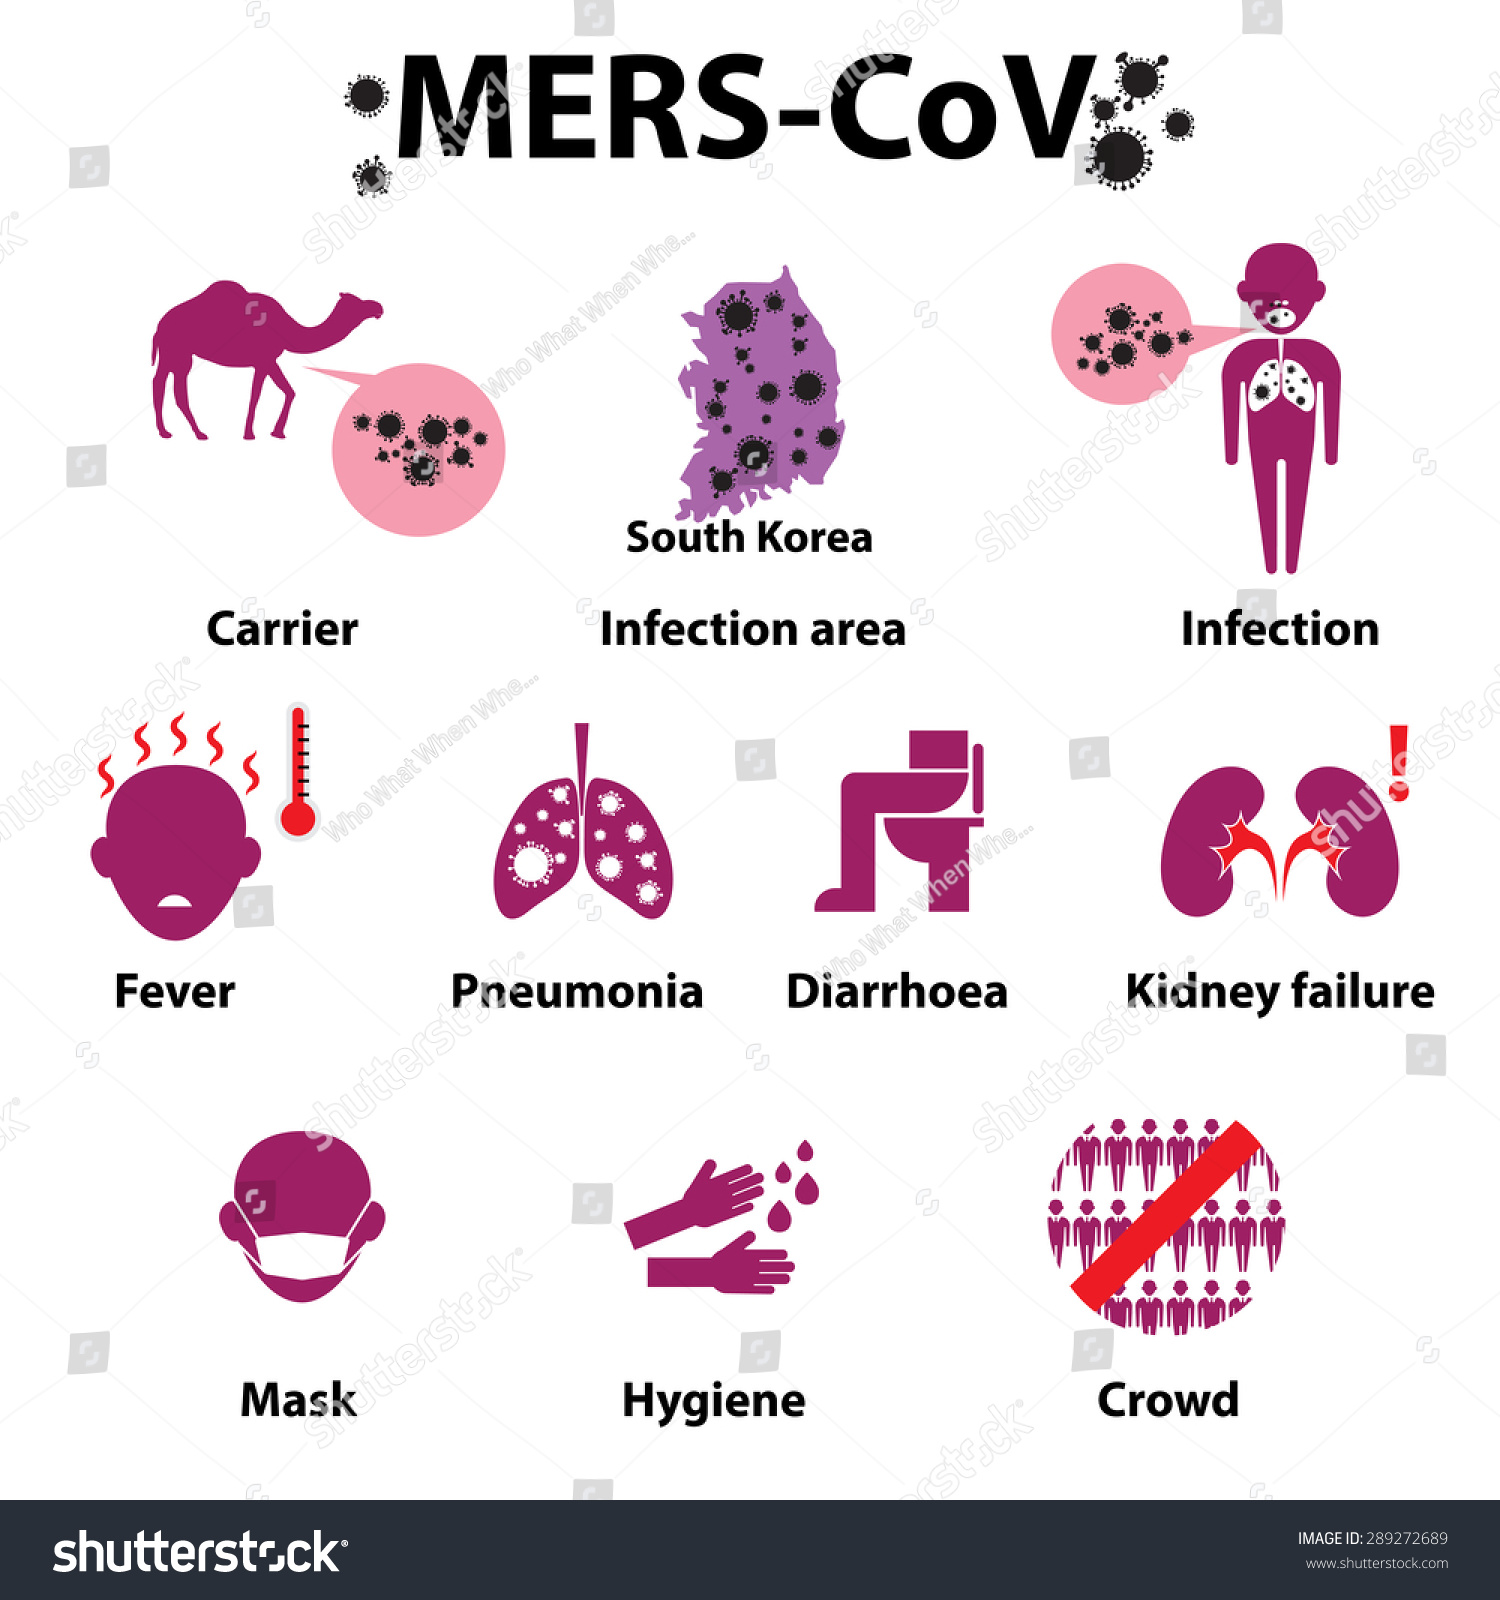 Merscov Middle East Respiratory Syndrome Corona Stock Vector 289272689 - Shutterstock1500 x 1600